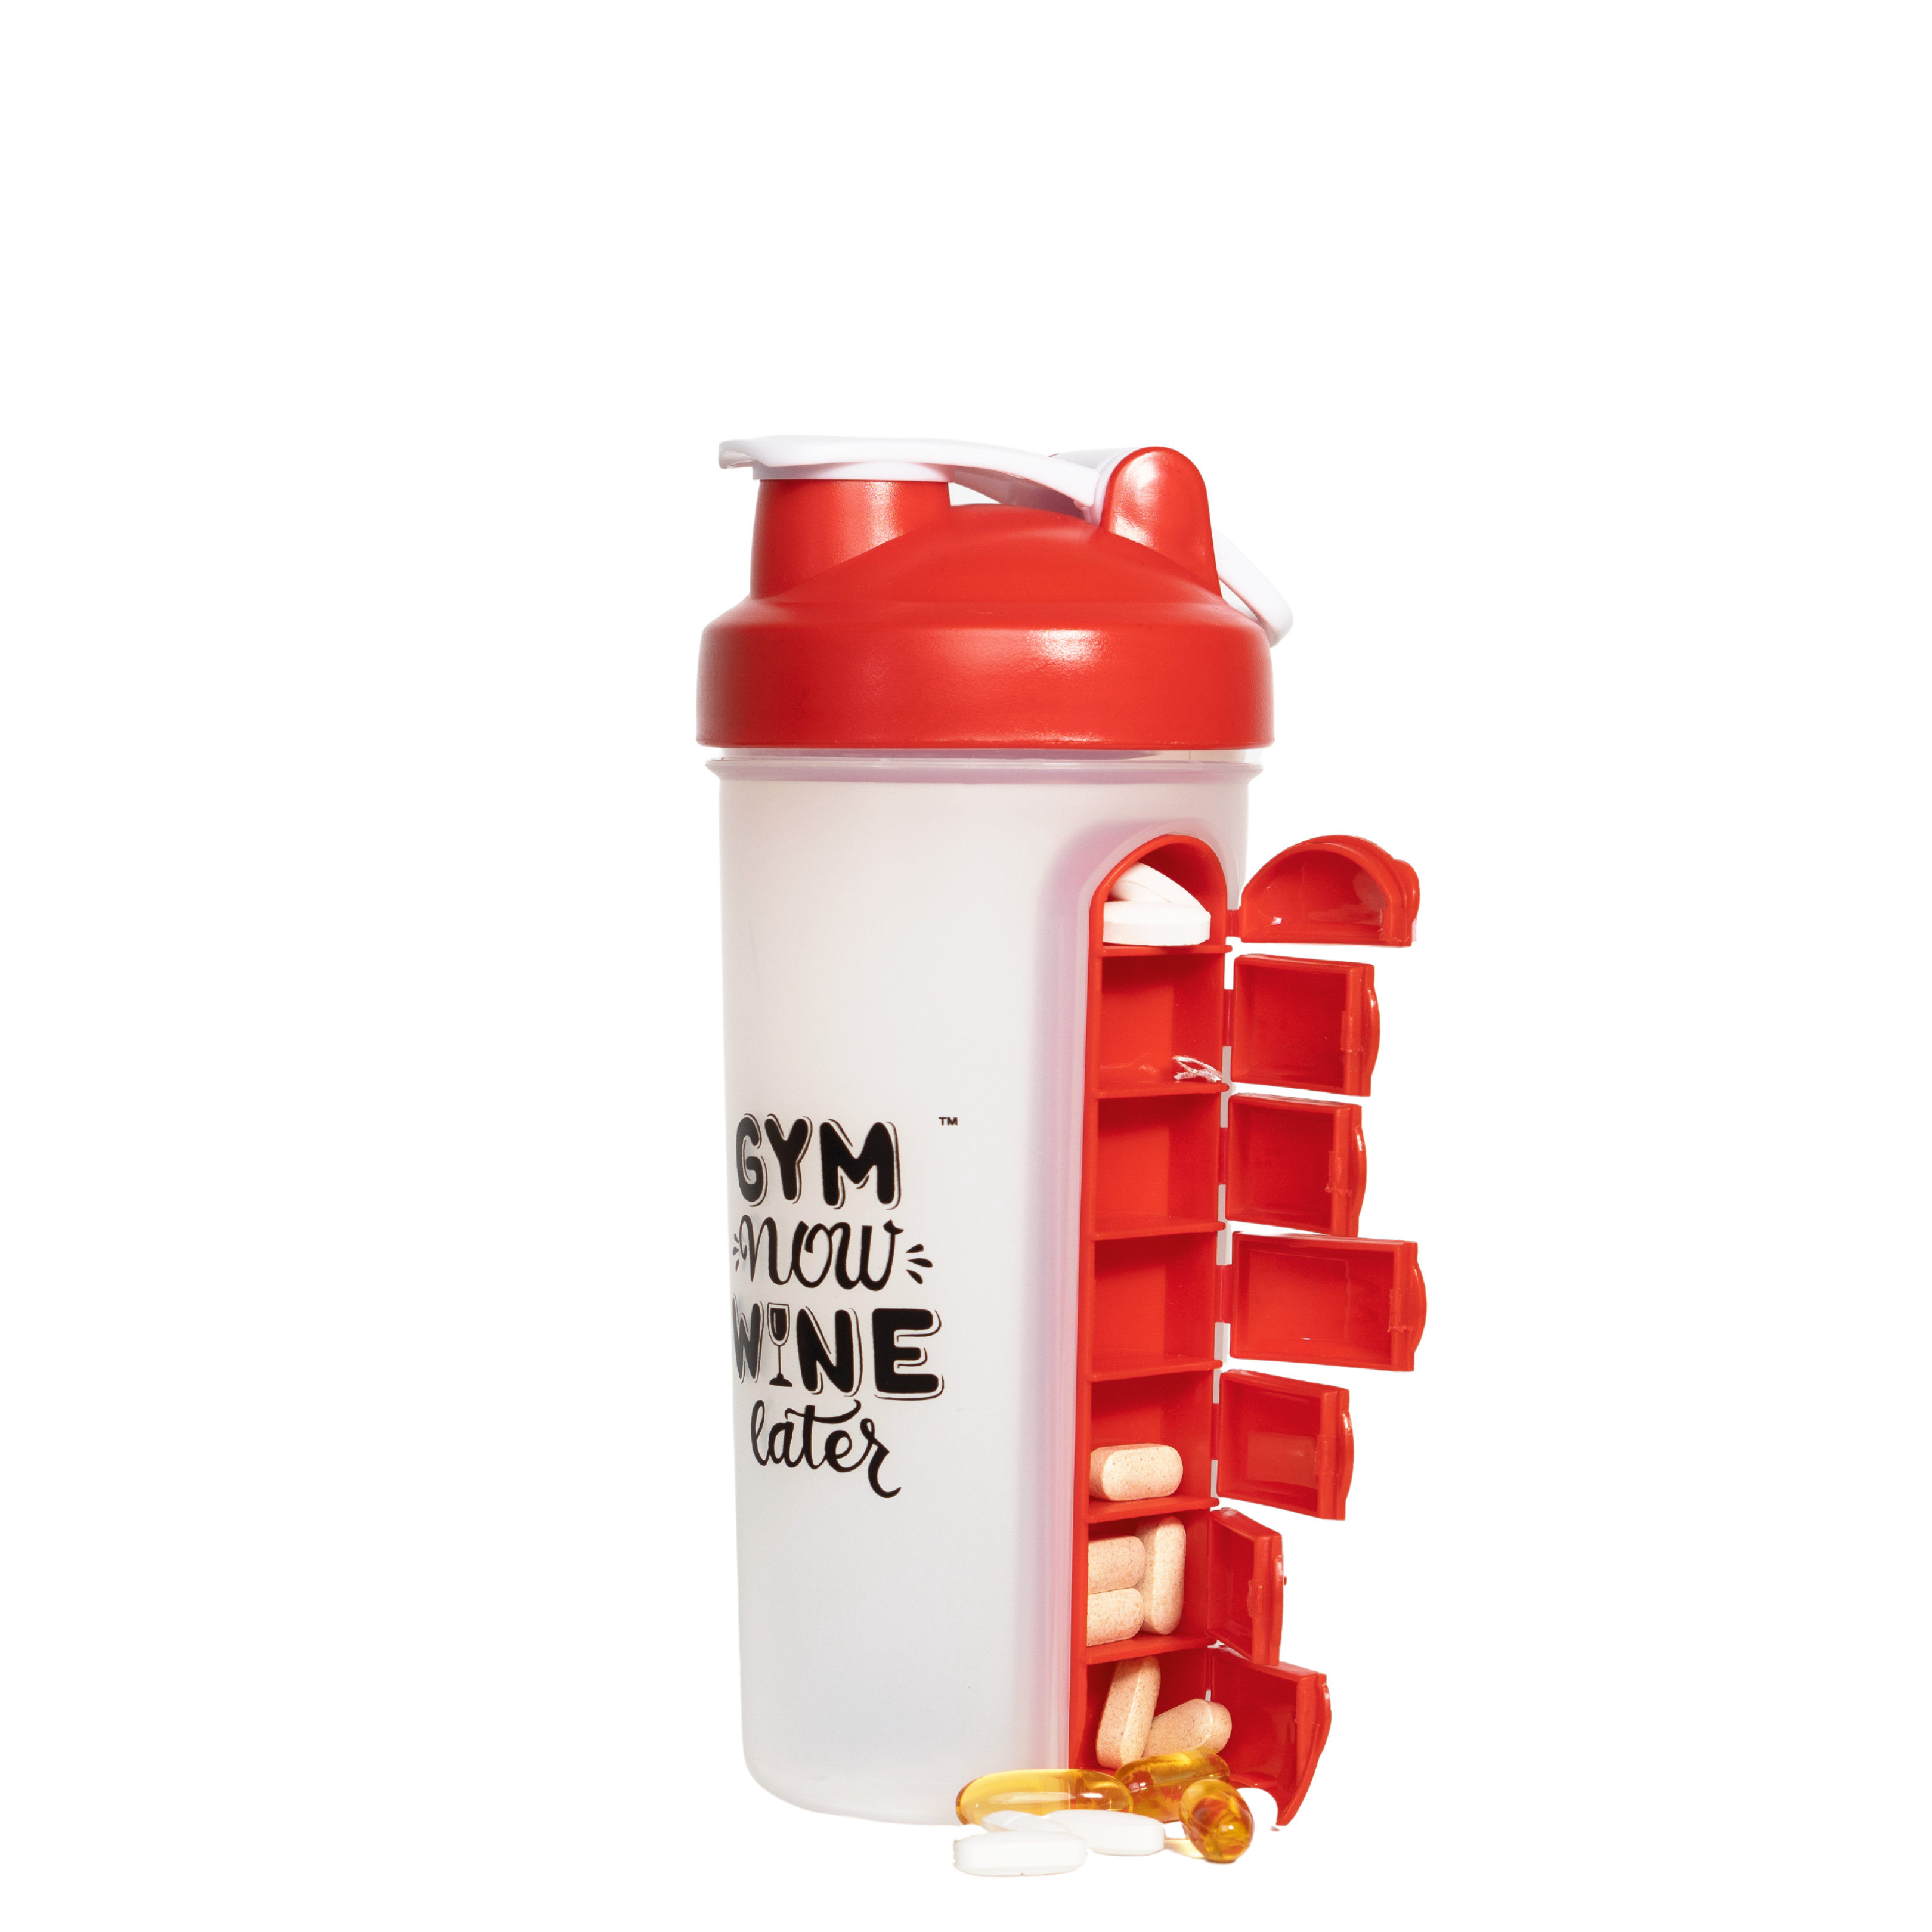 Blender Bottles For Mixing Protein Powders – AmBari Nutrition